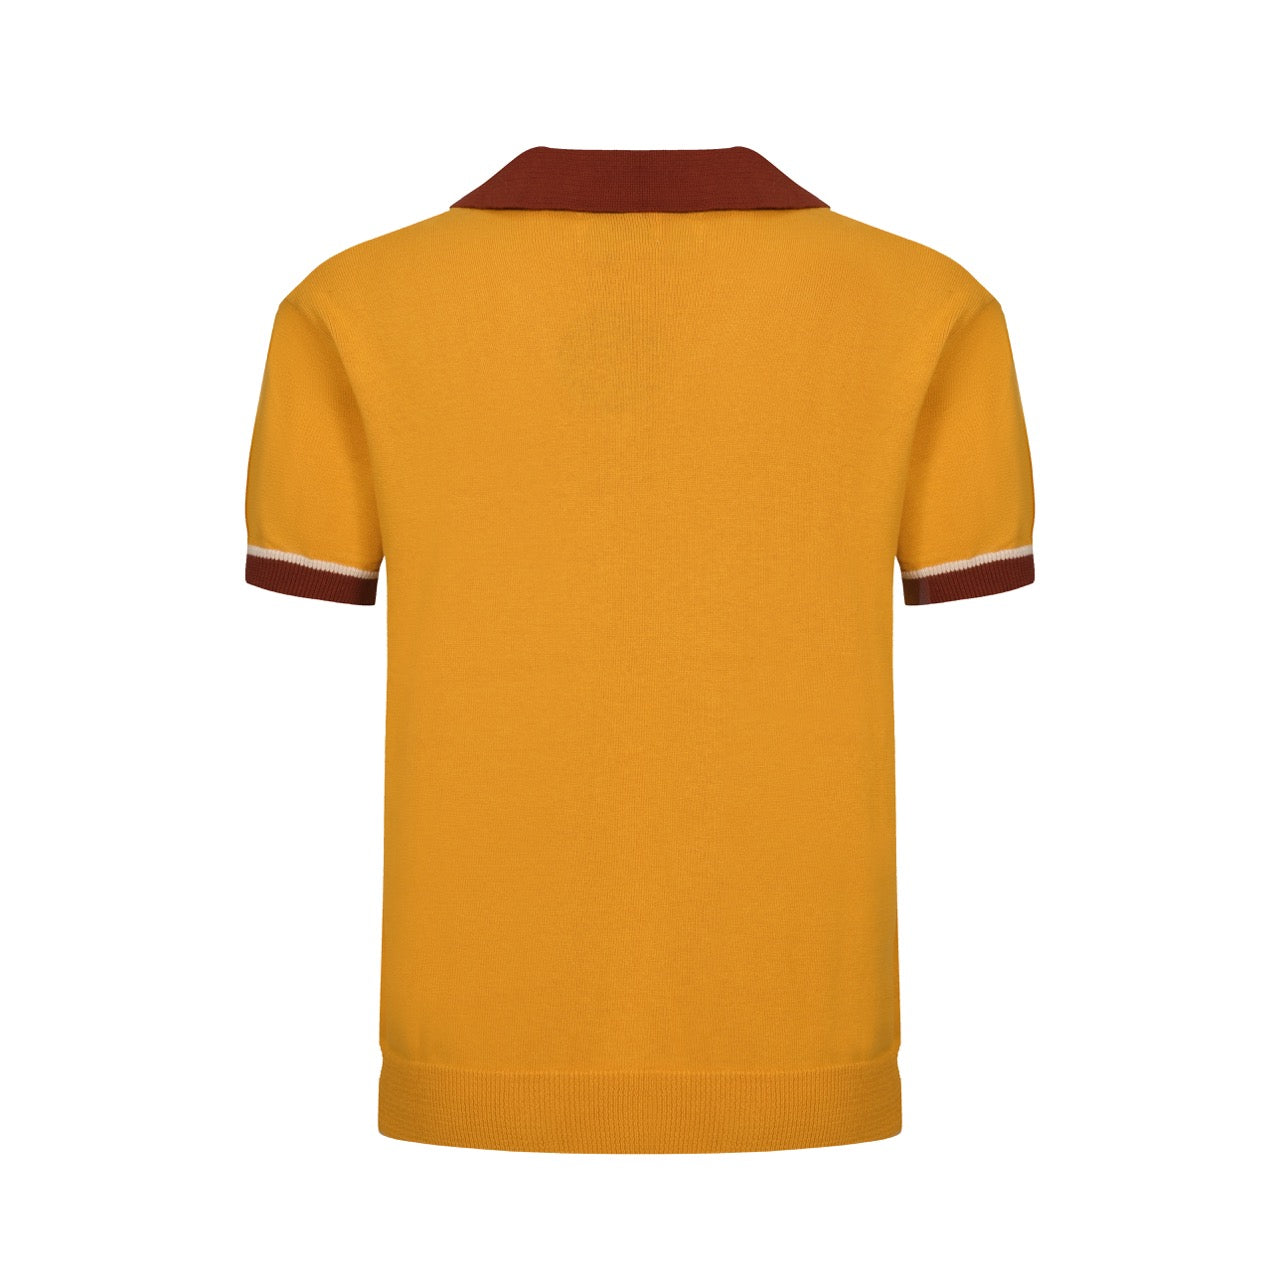 OXKNIT Men Vintage Clothing 1960s Mod Style V Neck Yellow Retro Polo Knitted Wear